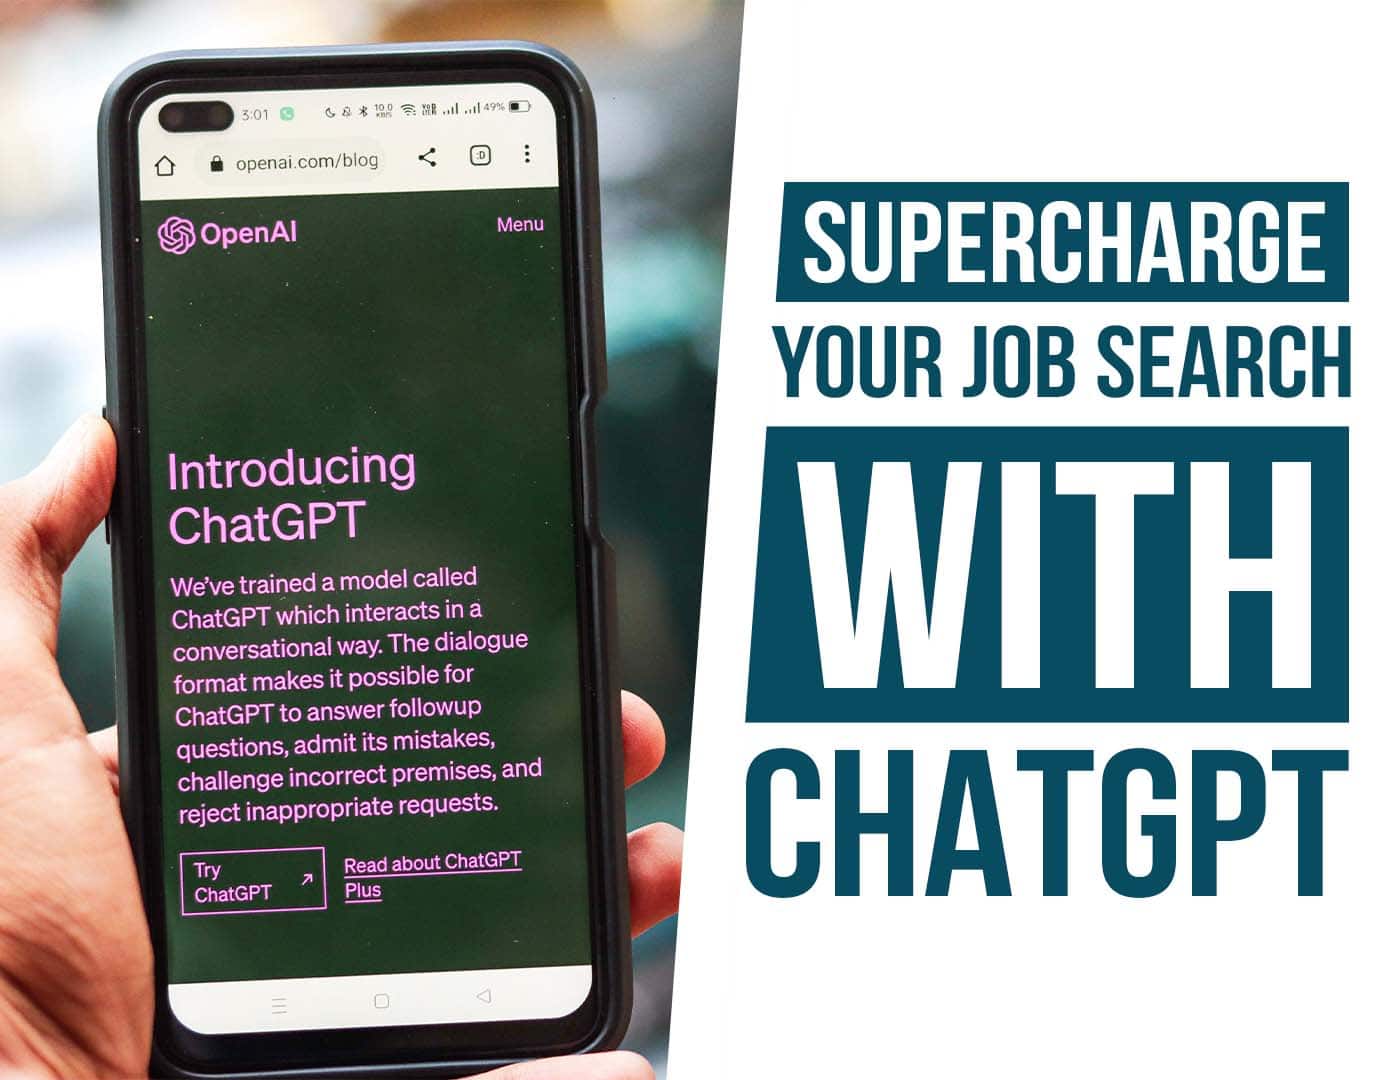 Supercharge your job search with ChatGPT